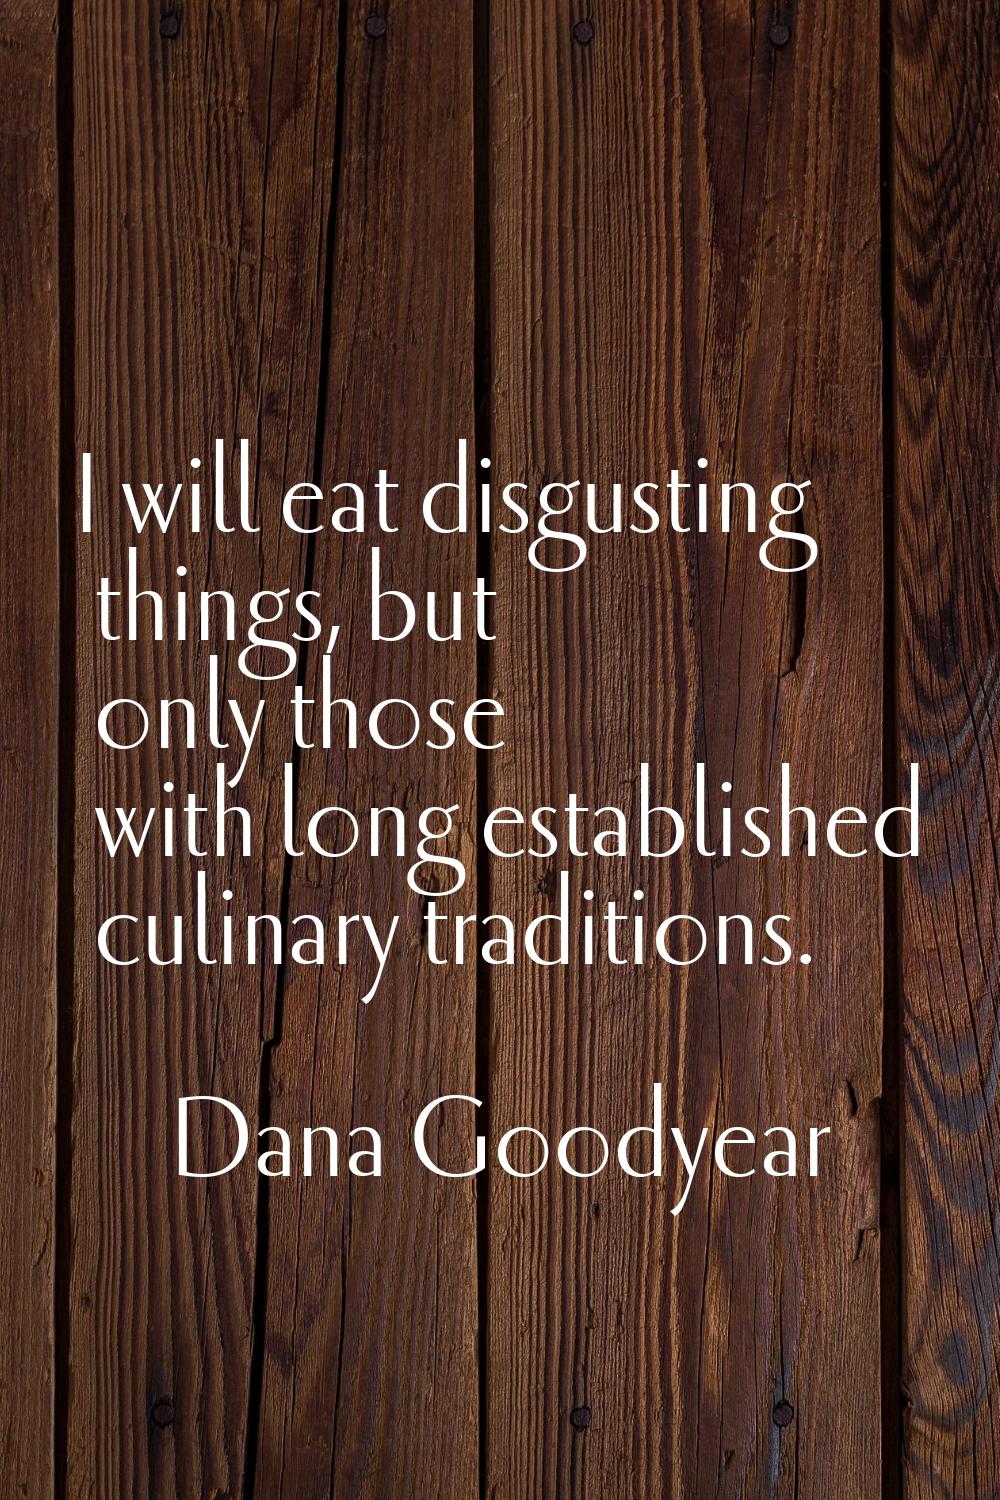 I will eat disgusting things, but only those with long established culinary traditions.